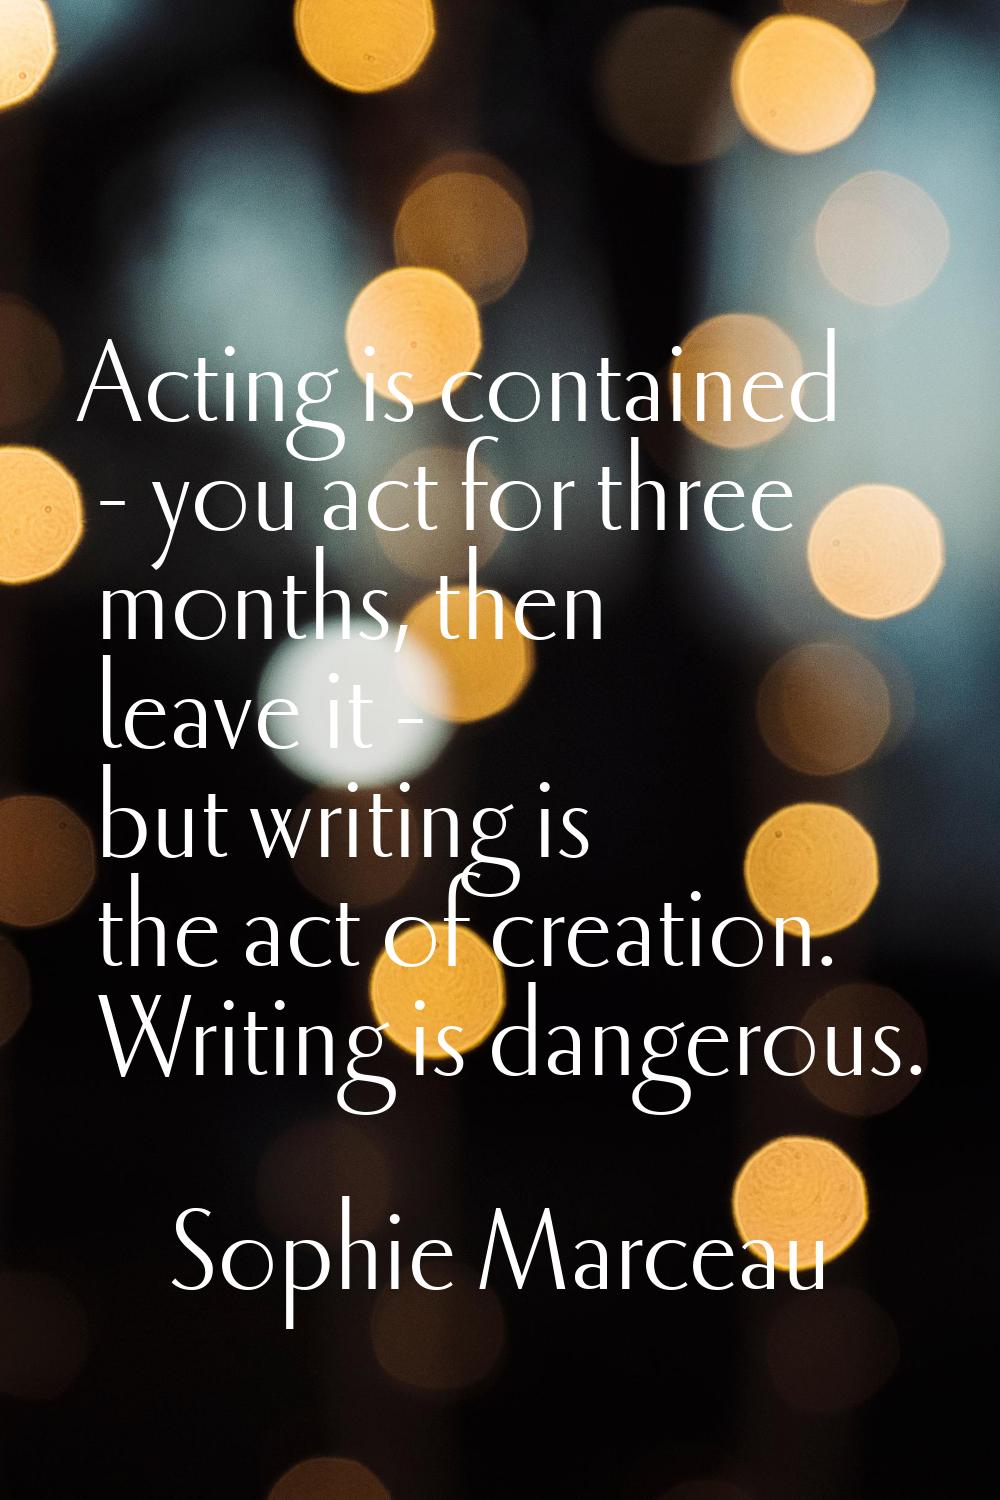 Acting is contained - you act for three months, then leave it - but writing is the act of creation.